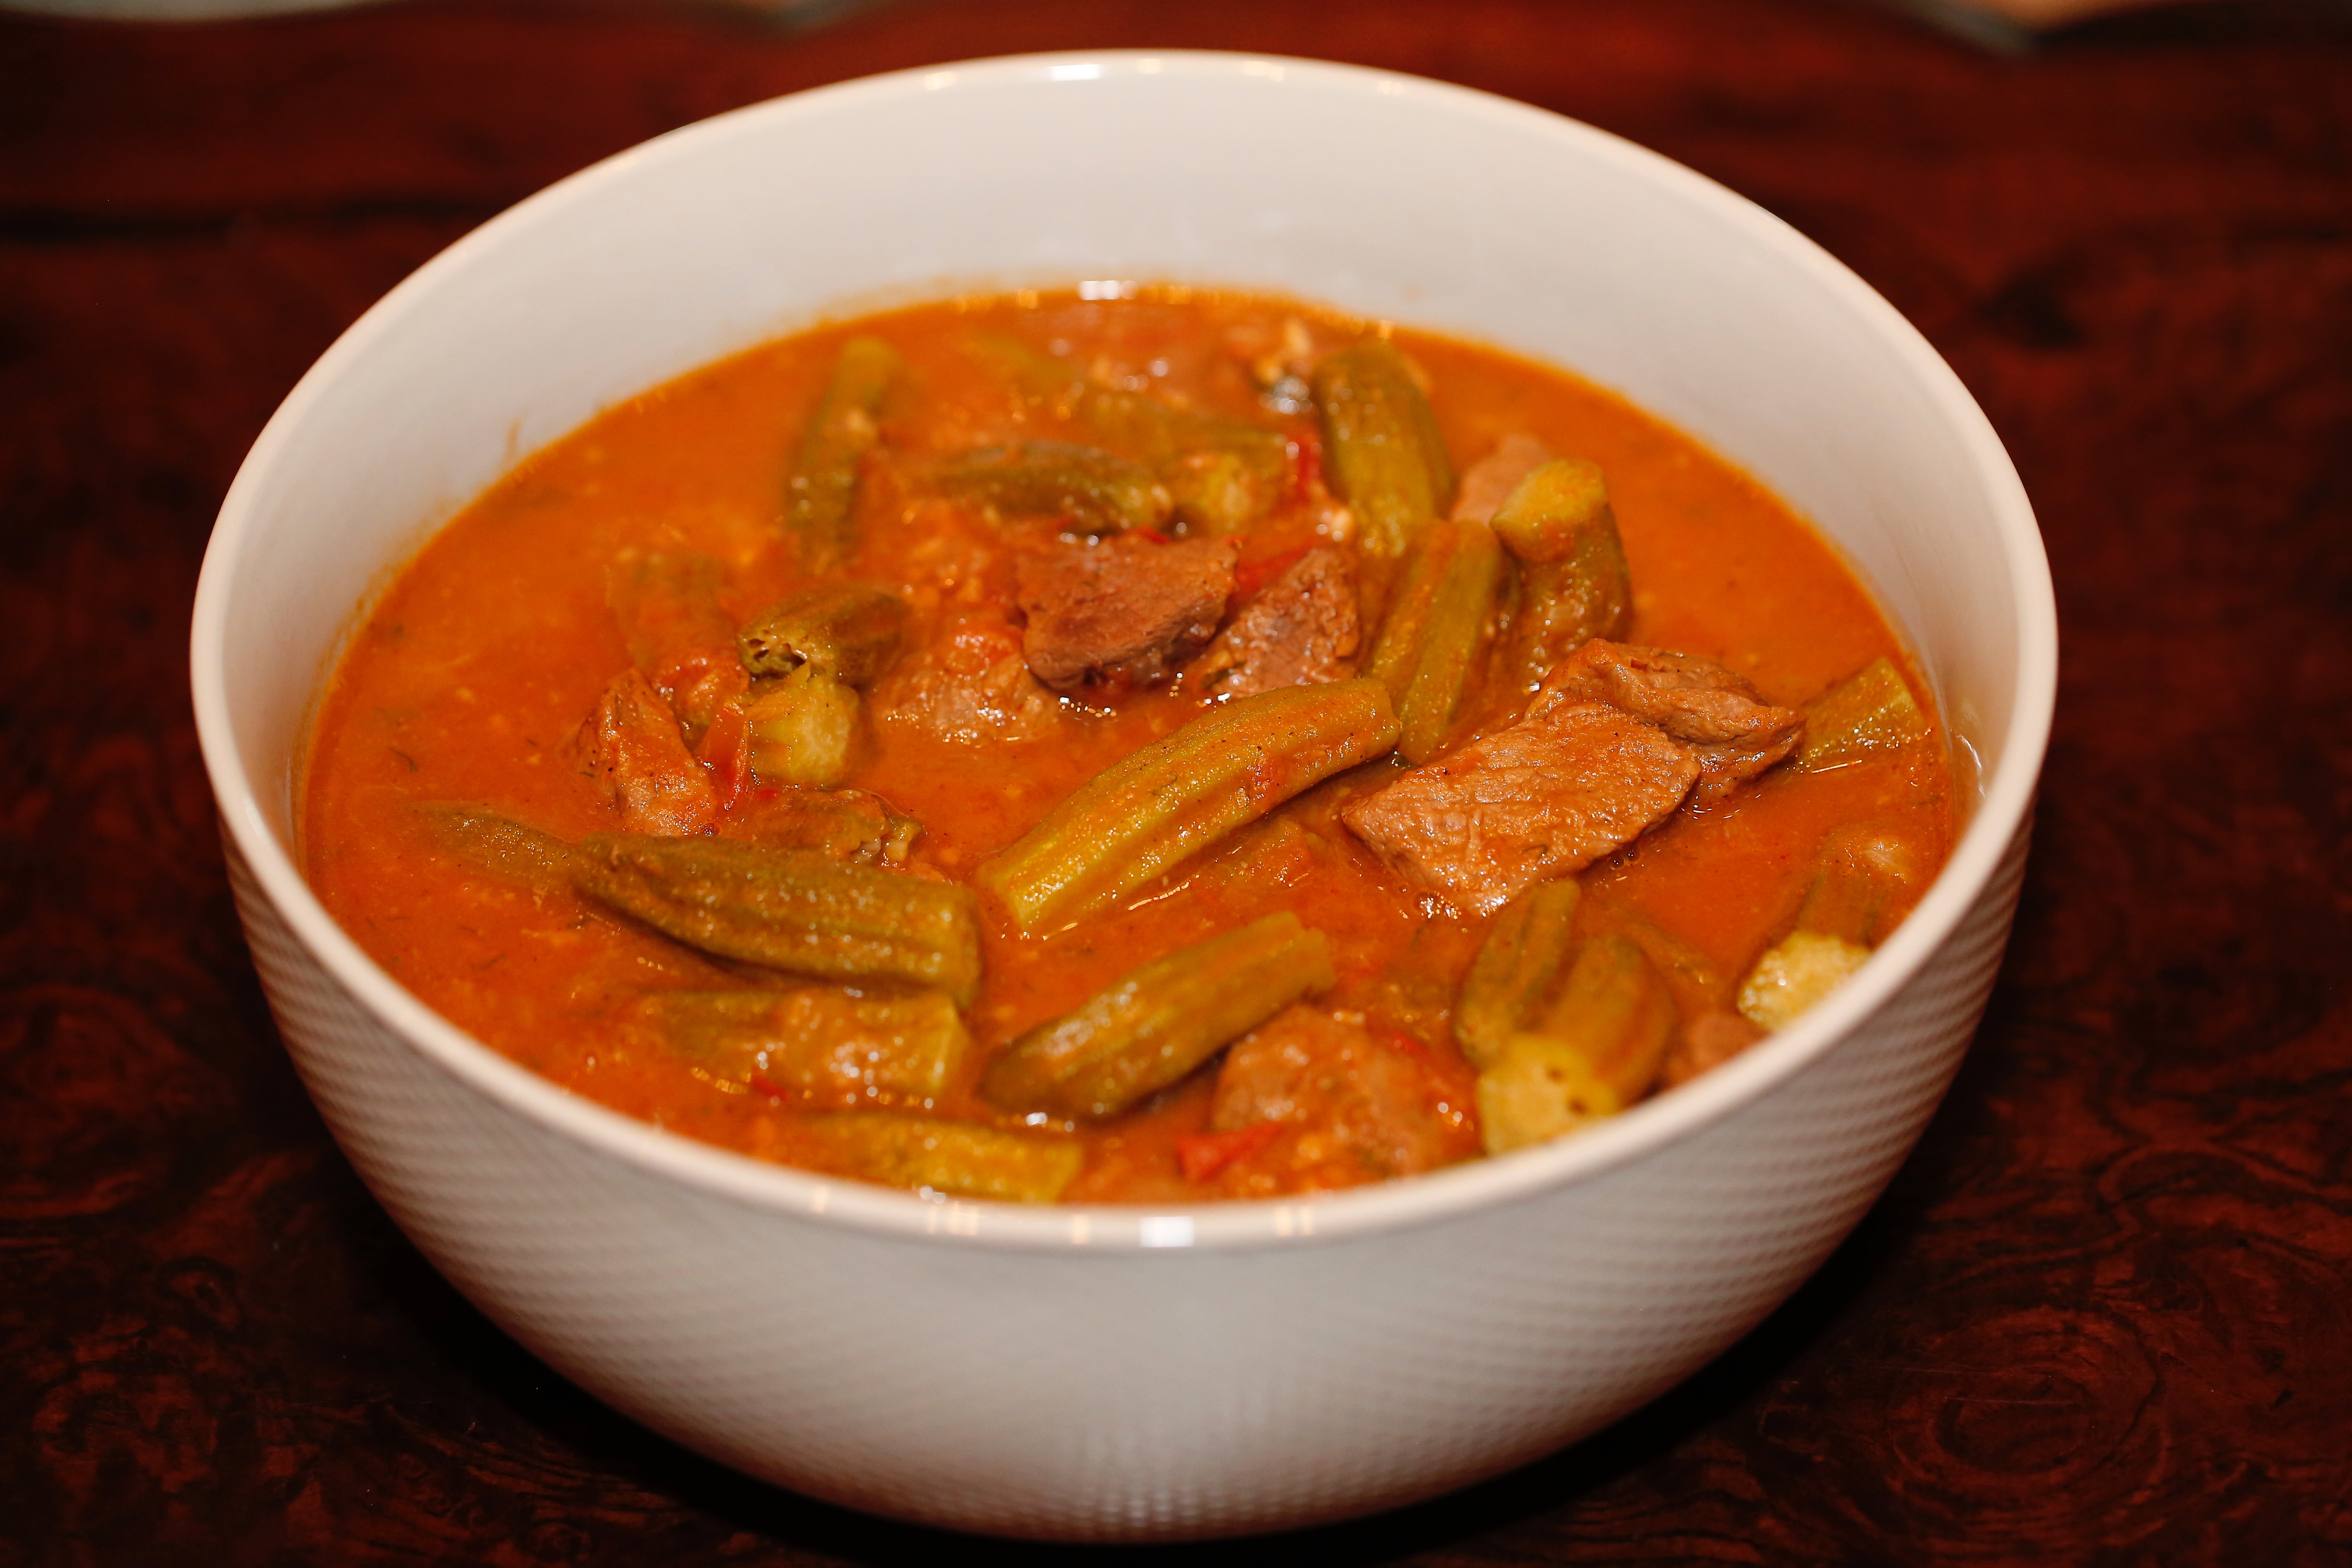 Pictured above is Okra stew cooked with meat, ready to eat. South Sudanese, Middle-eastern cuisine.